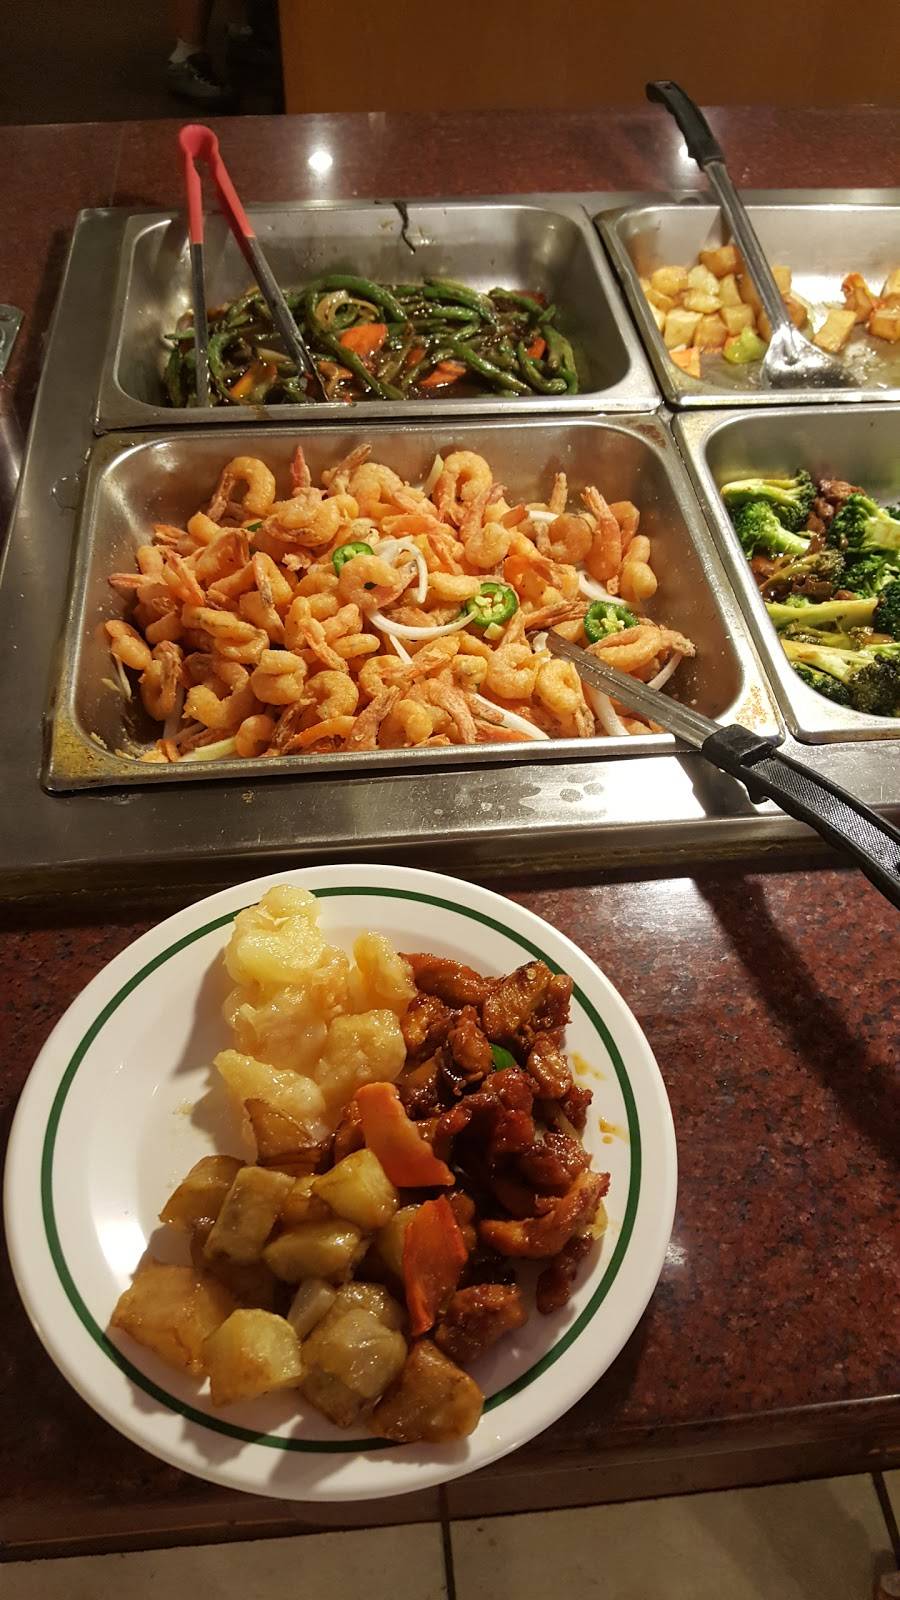 Family Buffet | restaurant | 2410 W 10th St, Greeley, CO 80634, USA | 9703369888 OR +1 970-336-9888